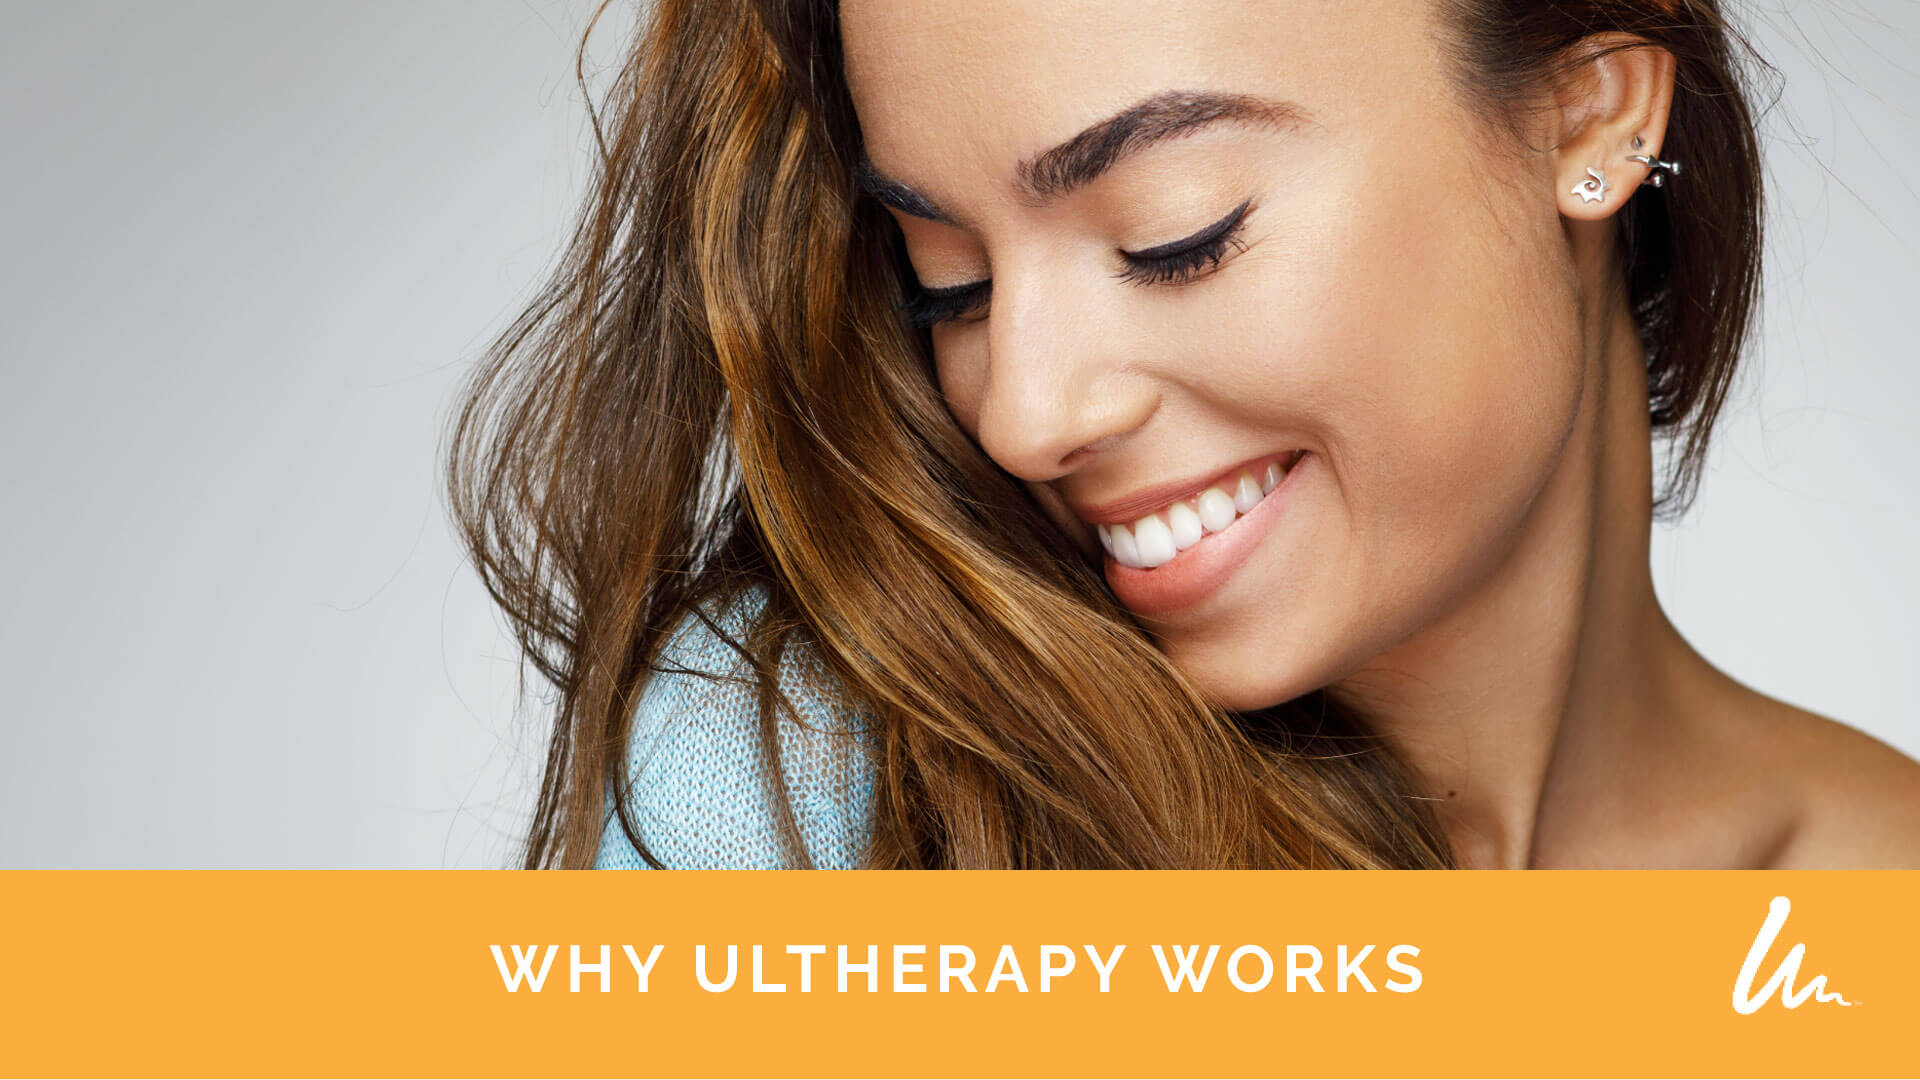 Why Ultherapy Works